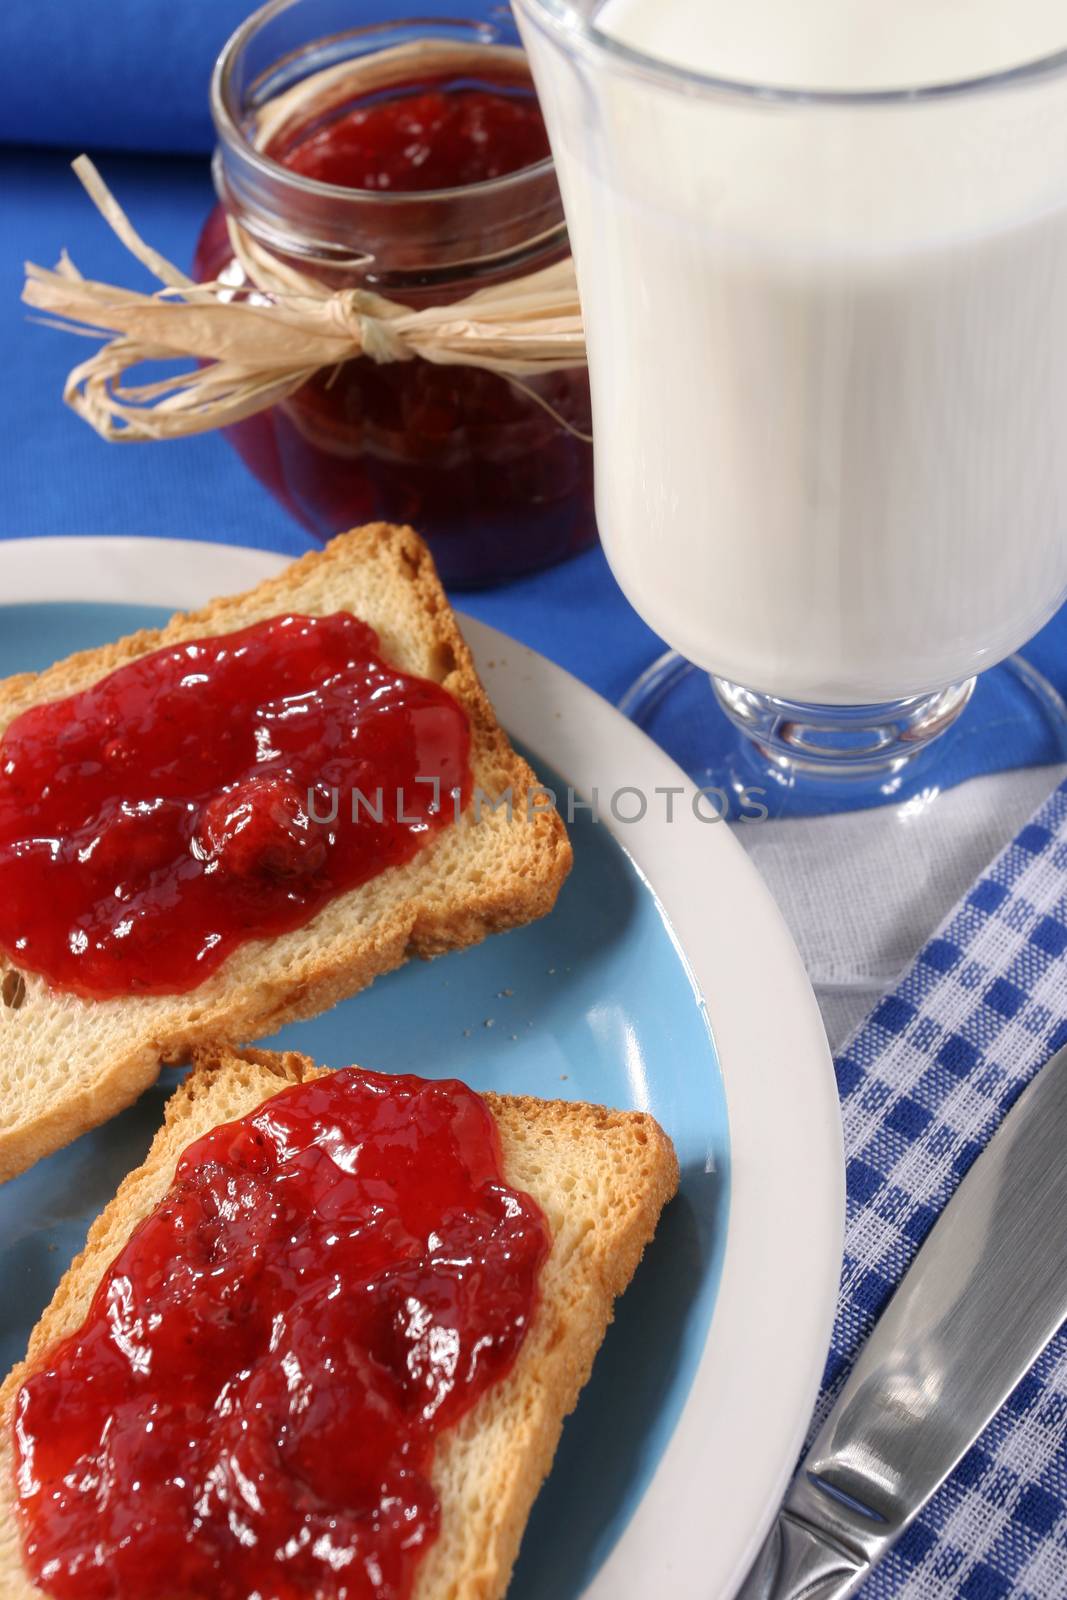 Homemade breakfast, toast with jam, a glass of milk and a jar of jam